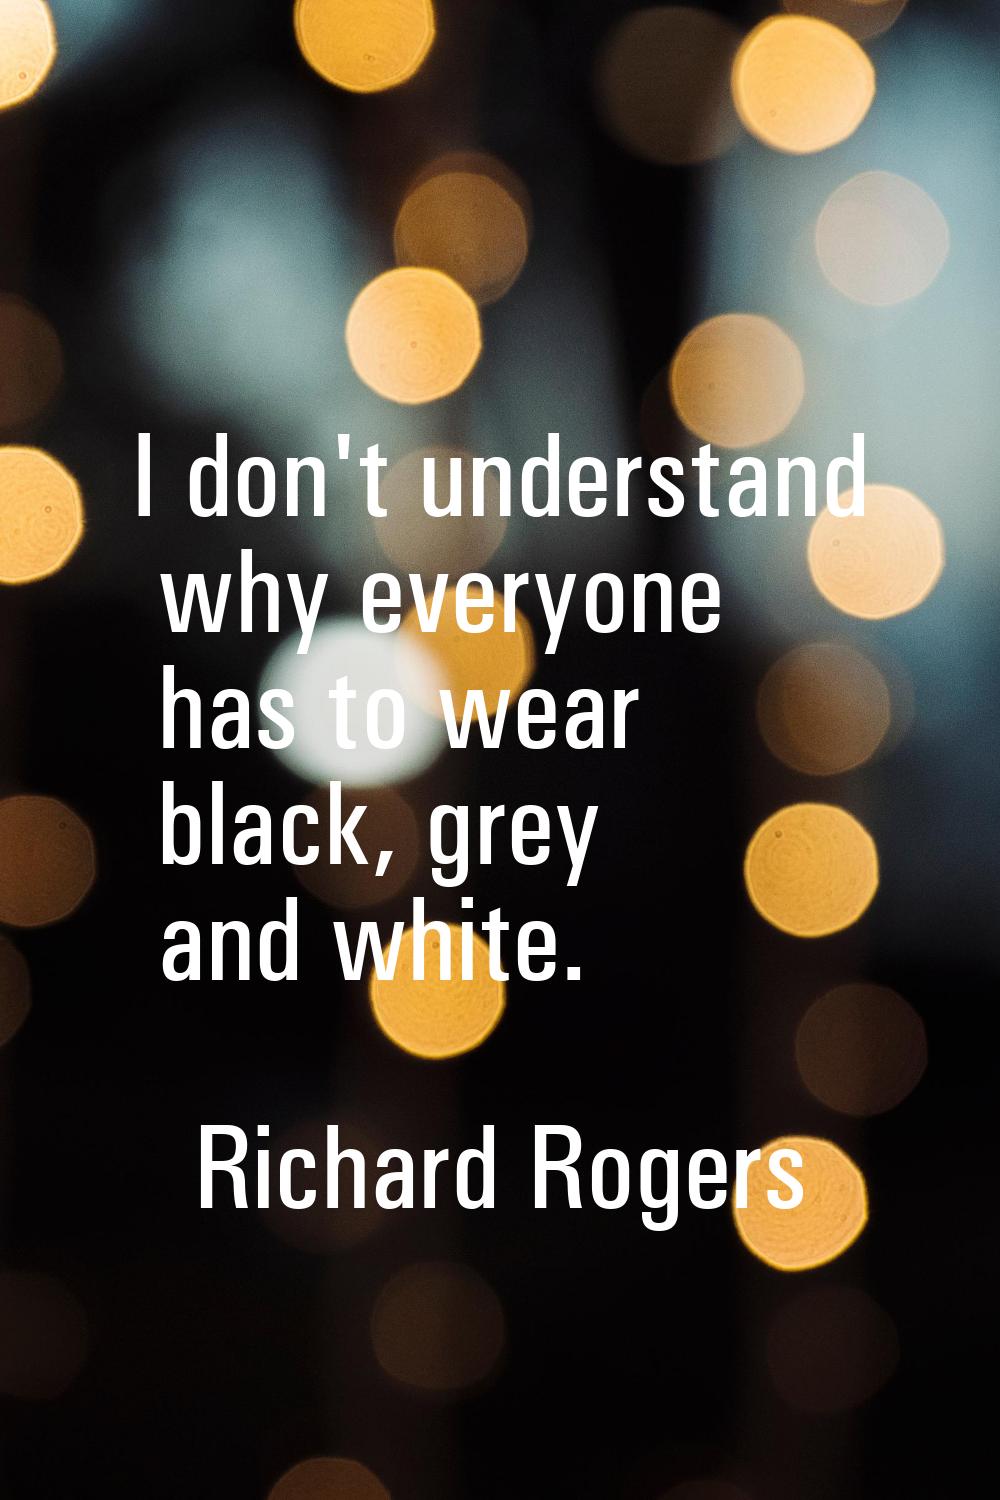 I don't understand why everyone has to wear black, grey and white.